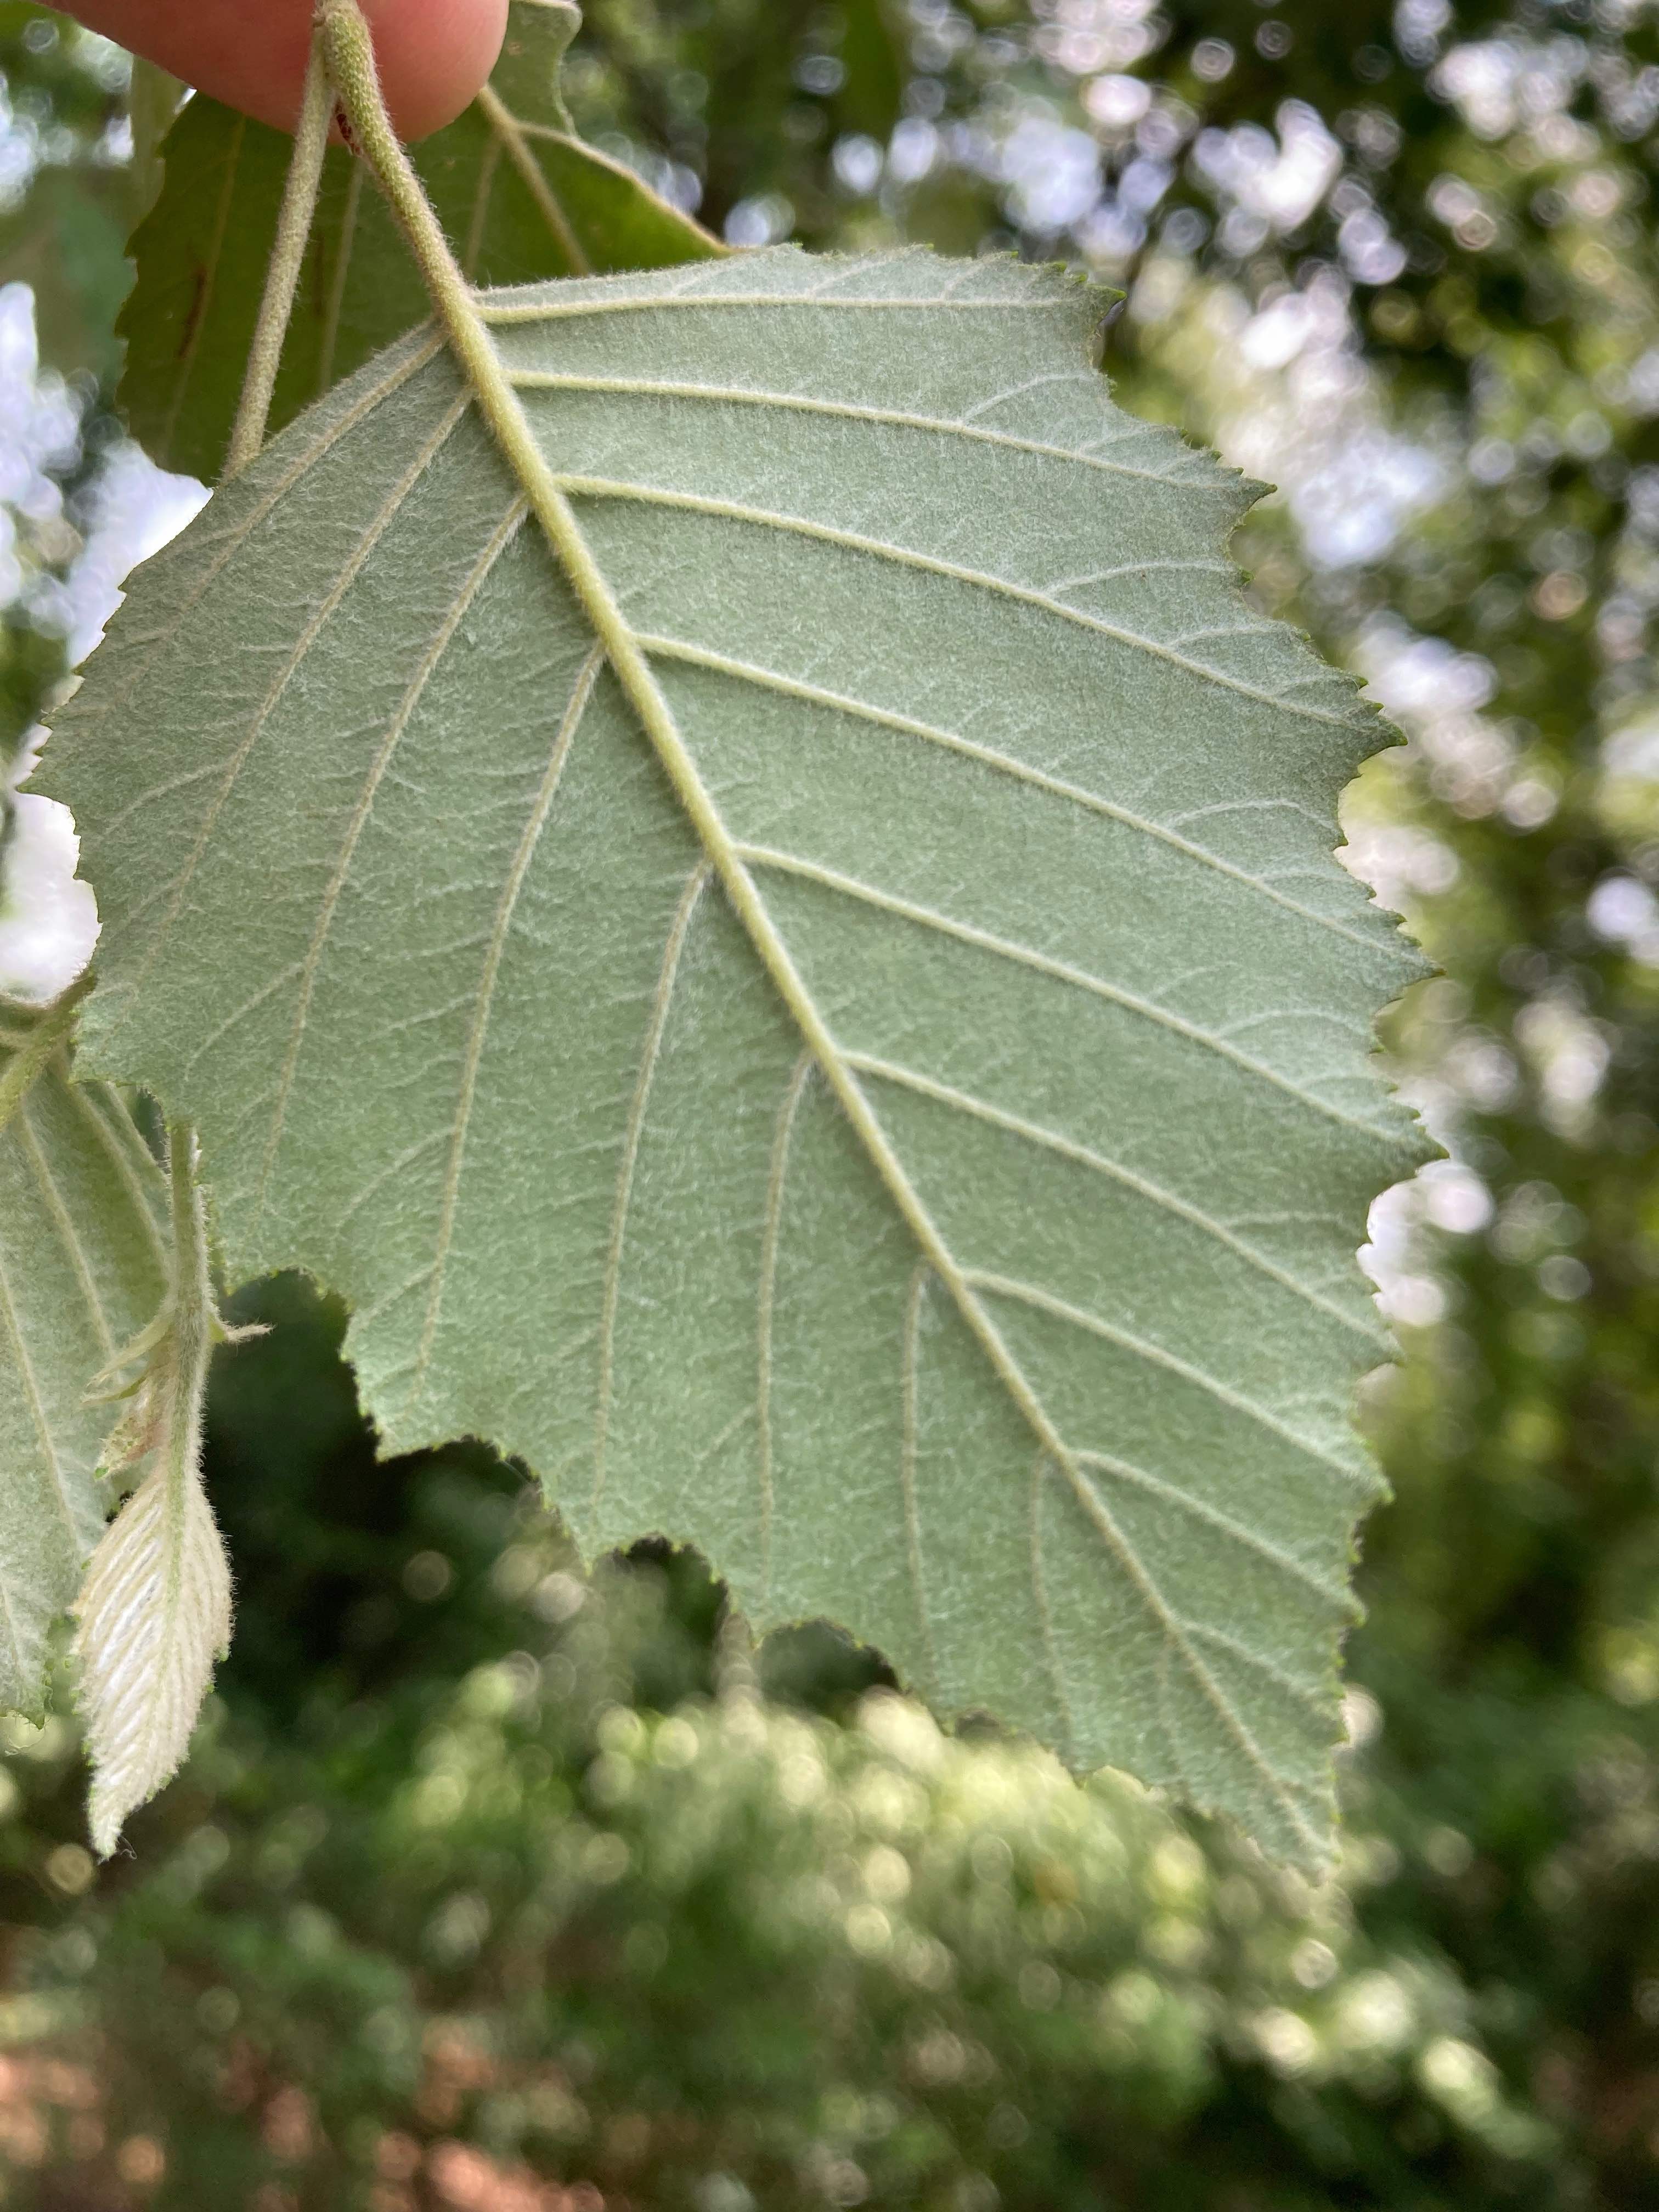 The Scientific Name is Betula nigra. You will likely hear them called River Birch, Red Birch. This picture shows the The undersides of the leaves are silvery in color. of Betula nigra